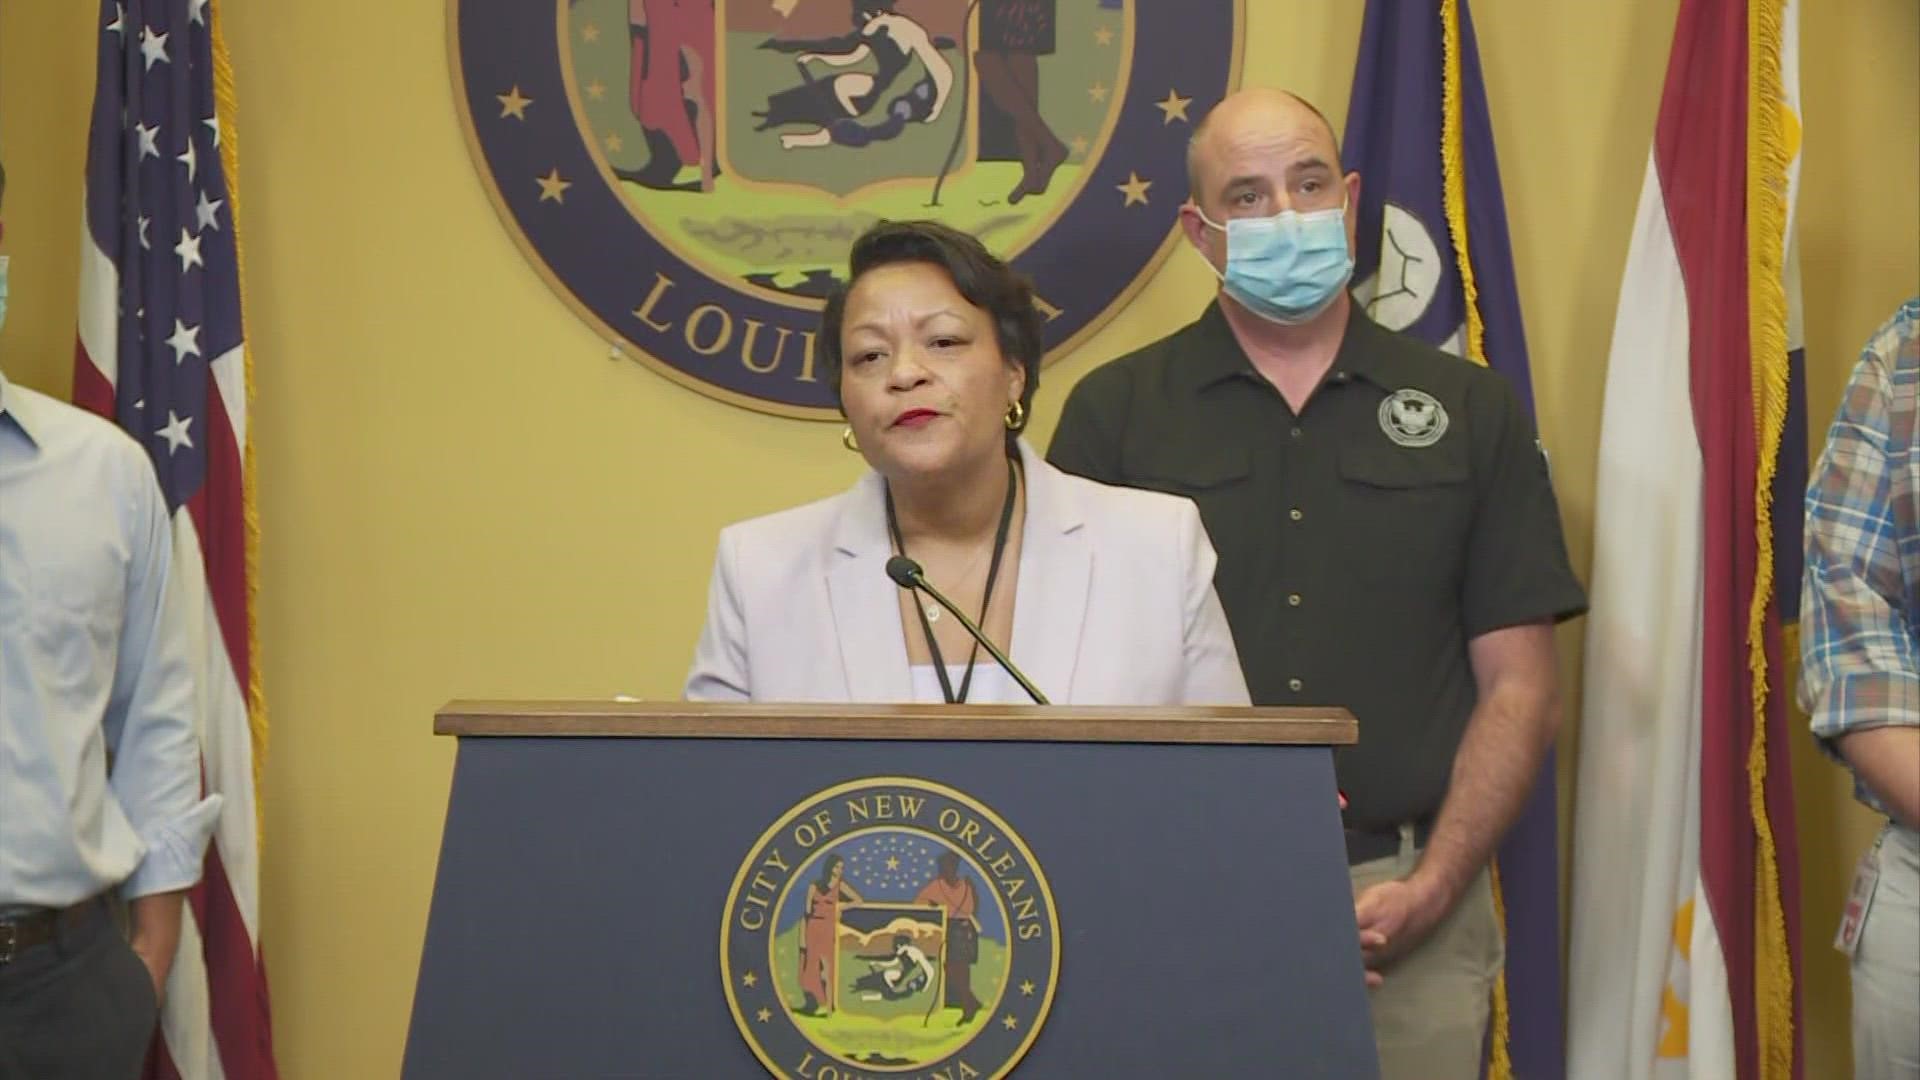 New Orleans Mayor LaToya Cantrell is addressing the debris and trash pickup efforts in the city after Hurricane Ida slowed down the process.